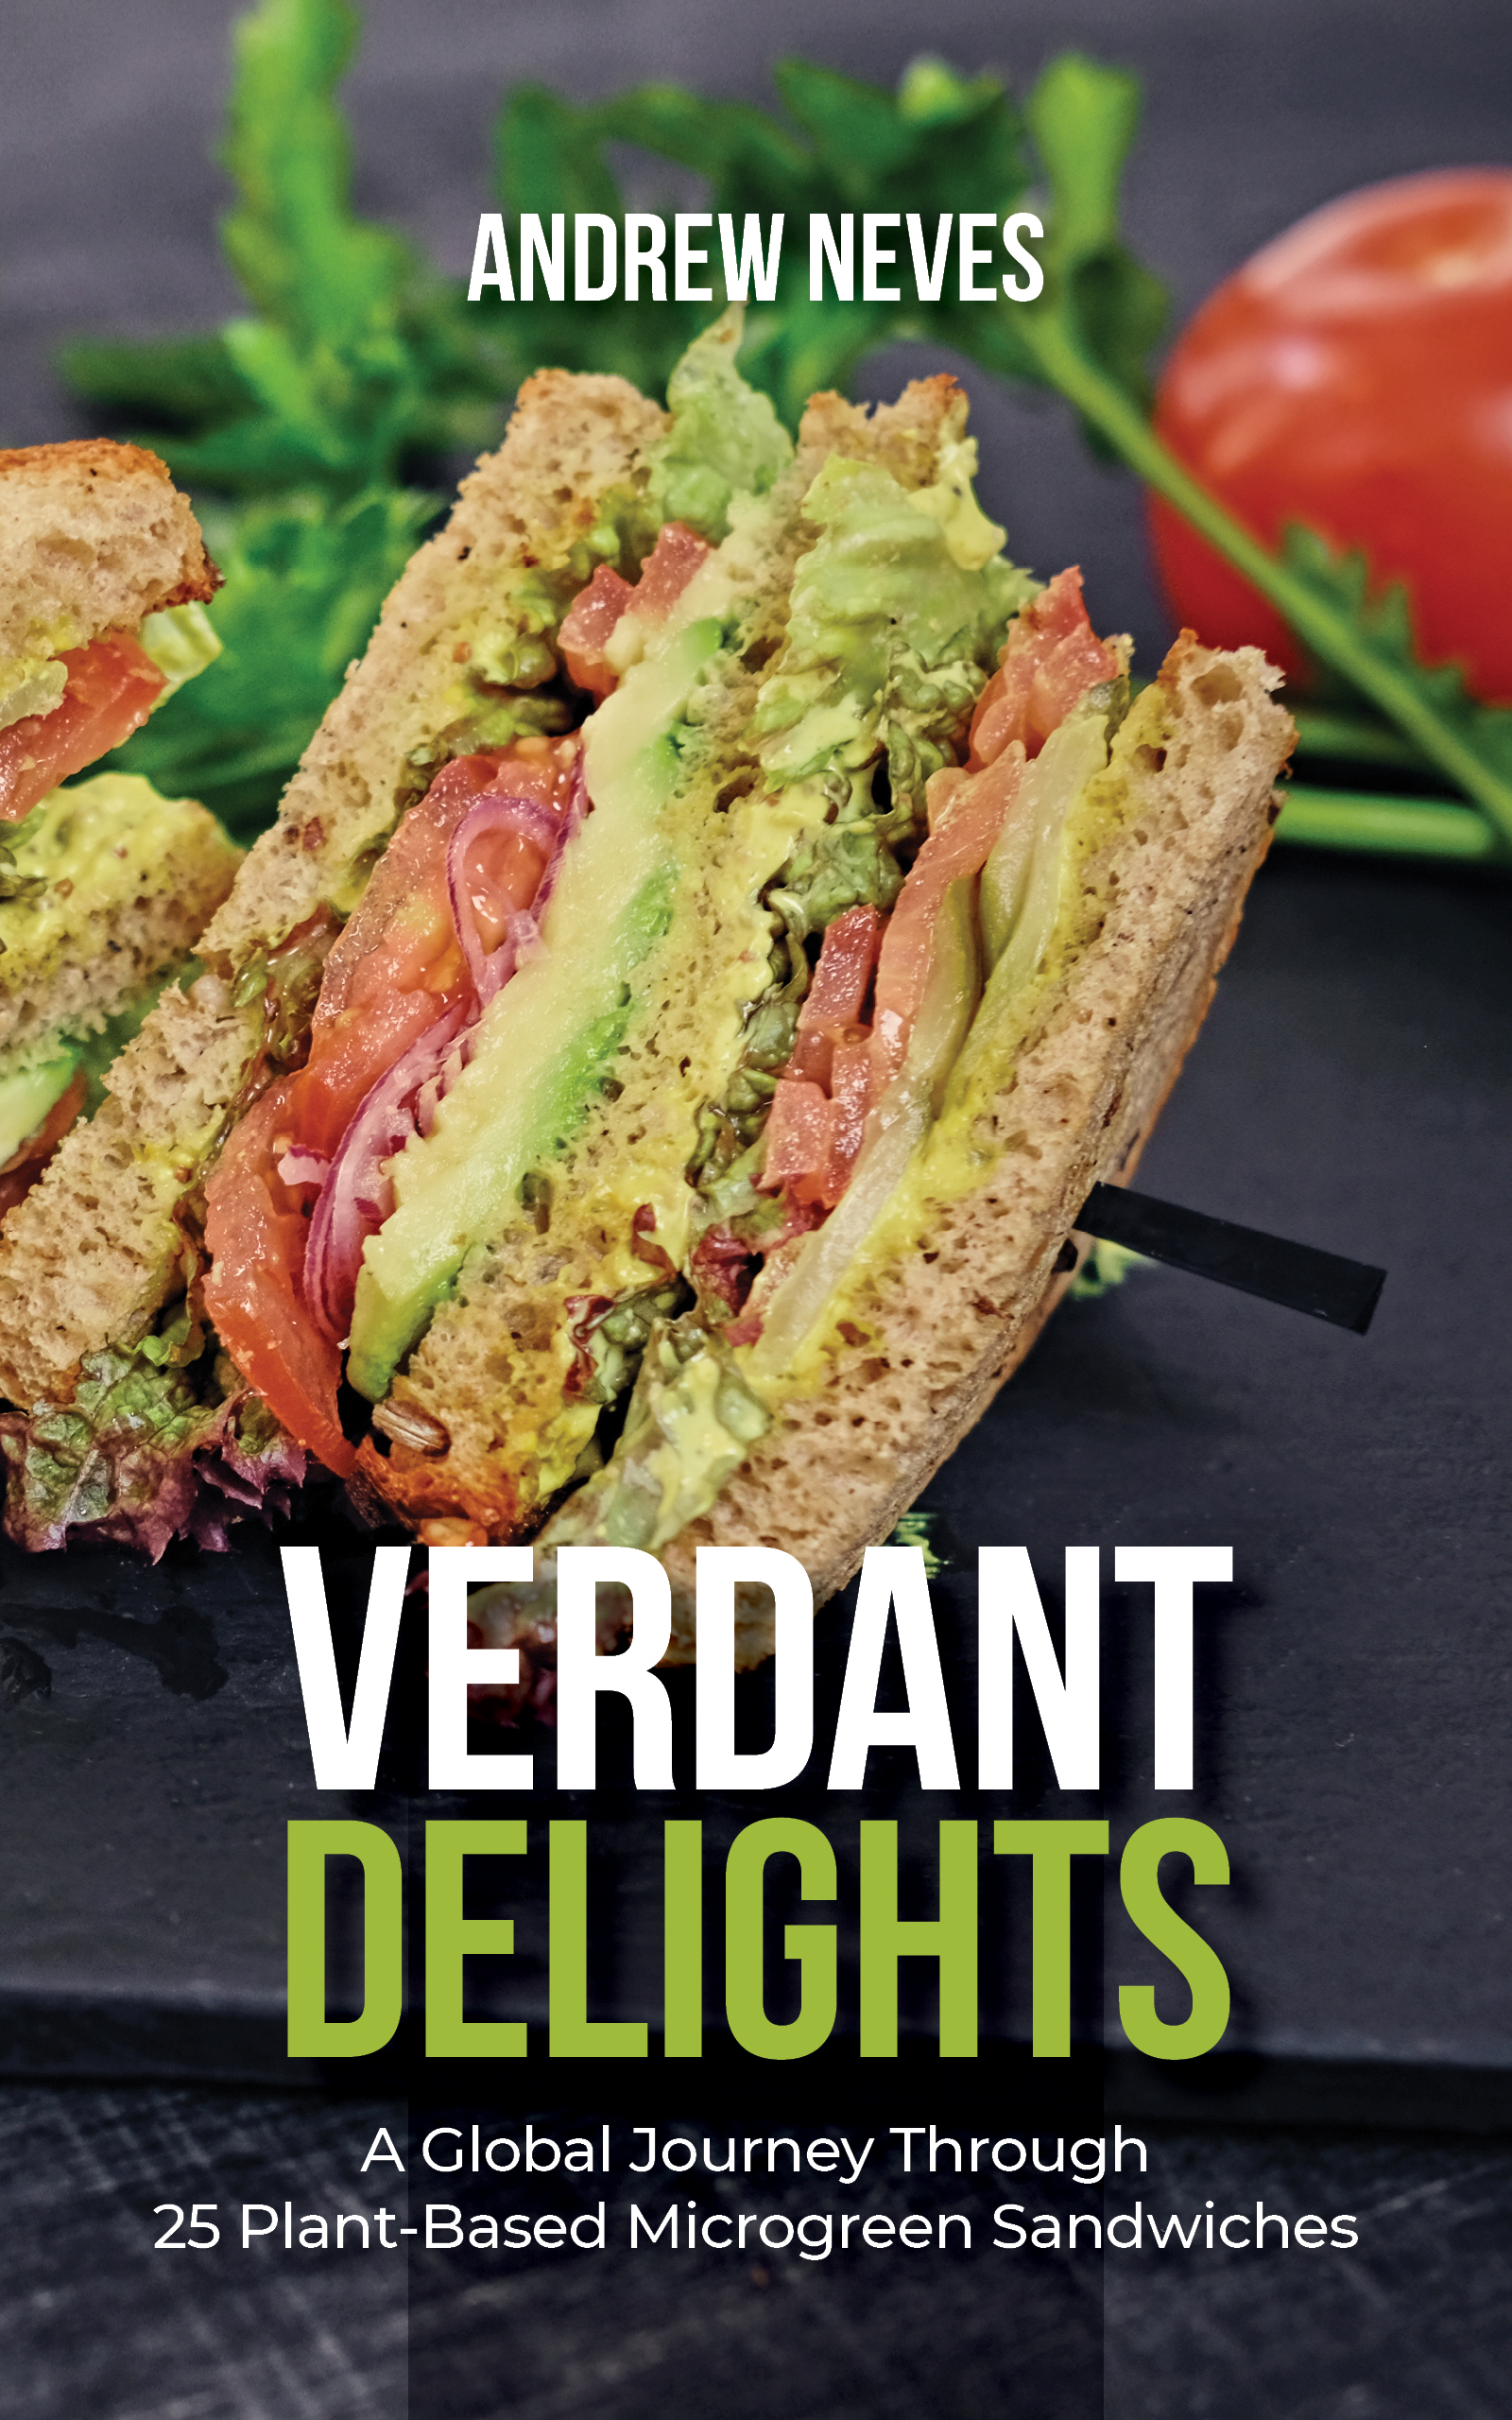 Verdant Delights: A Global Journey Through 25 Plant-Based Microgreen Sandwiches